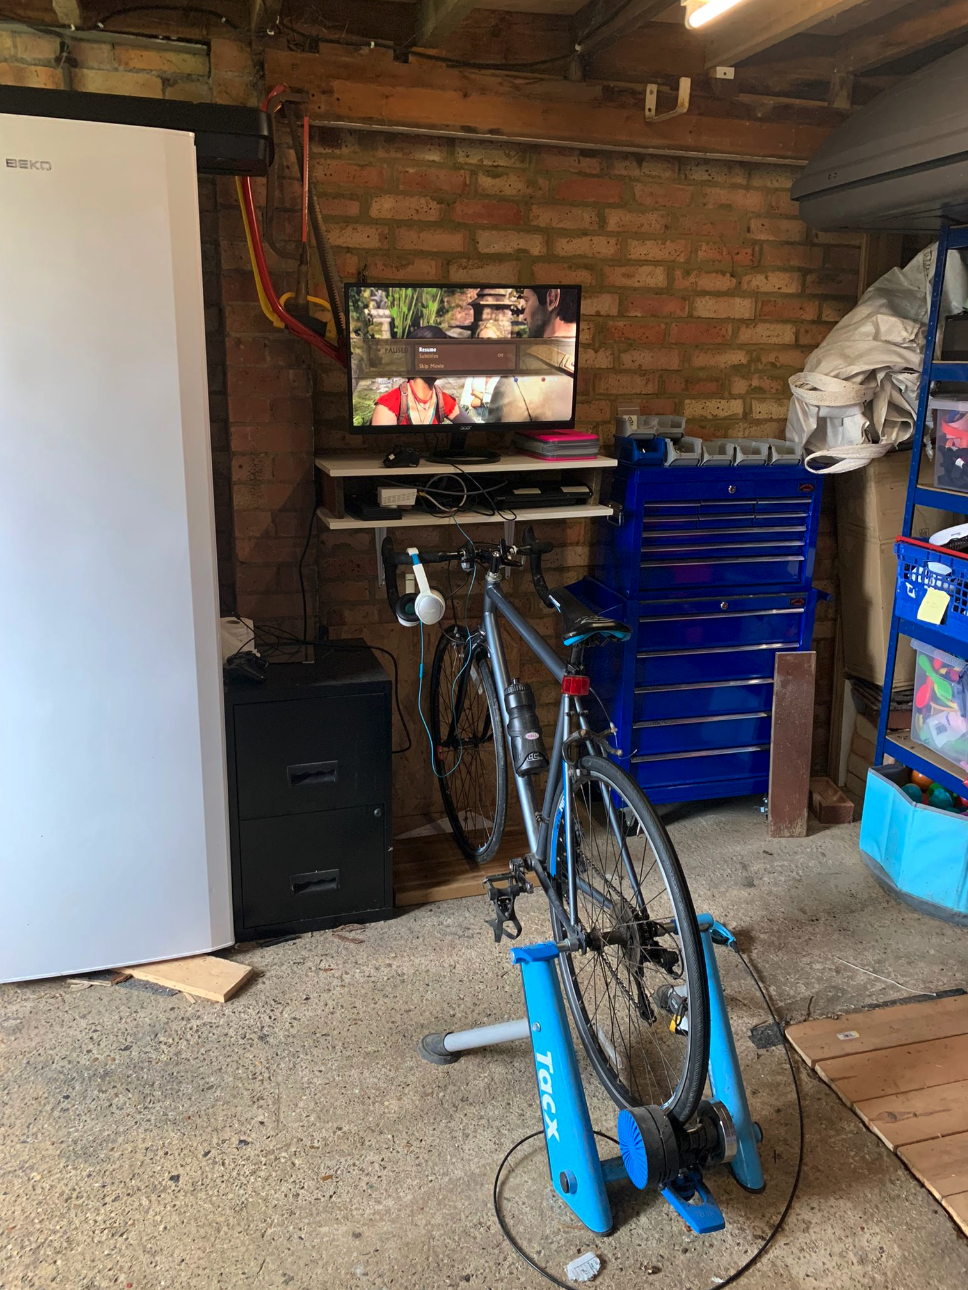 Exercise bike in front of some permanent shelves with a ps3 on them